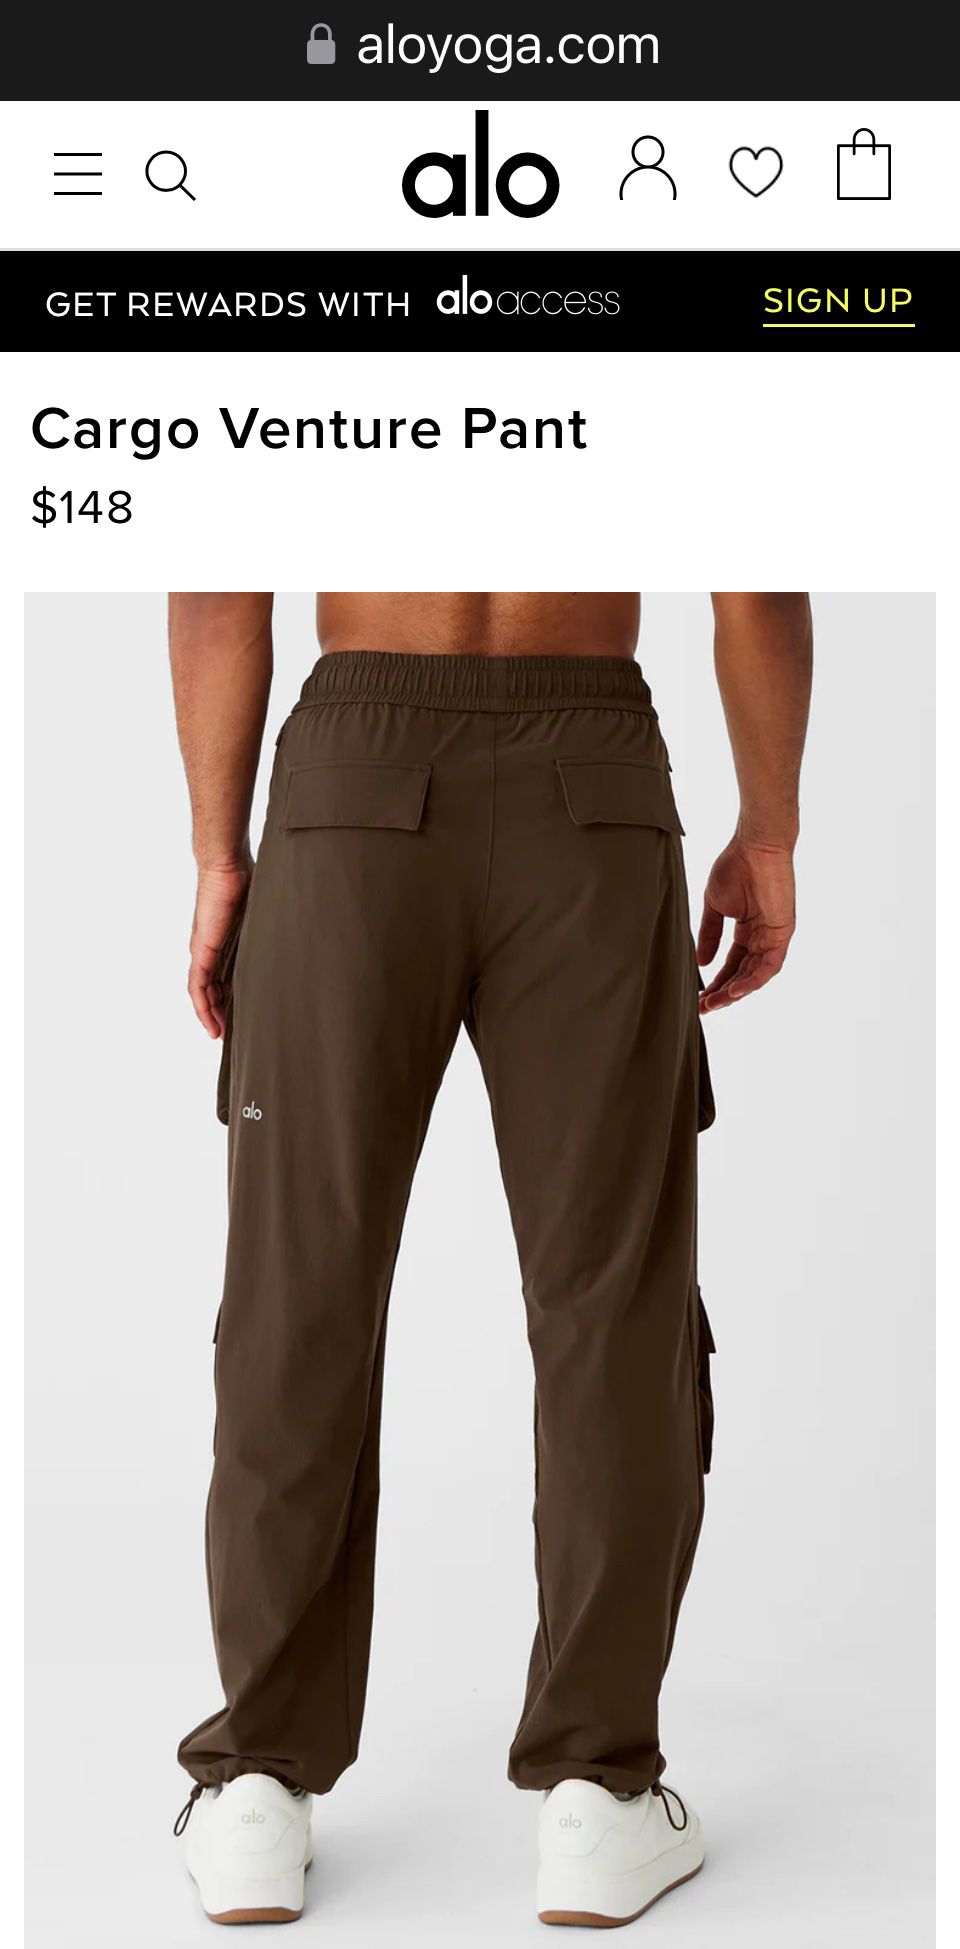 Alo Yoga - Cargo Venture Pants - BRAND NEW IN BAG for Sale in Los